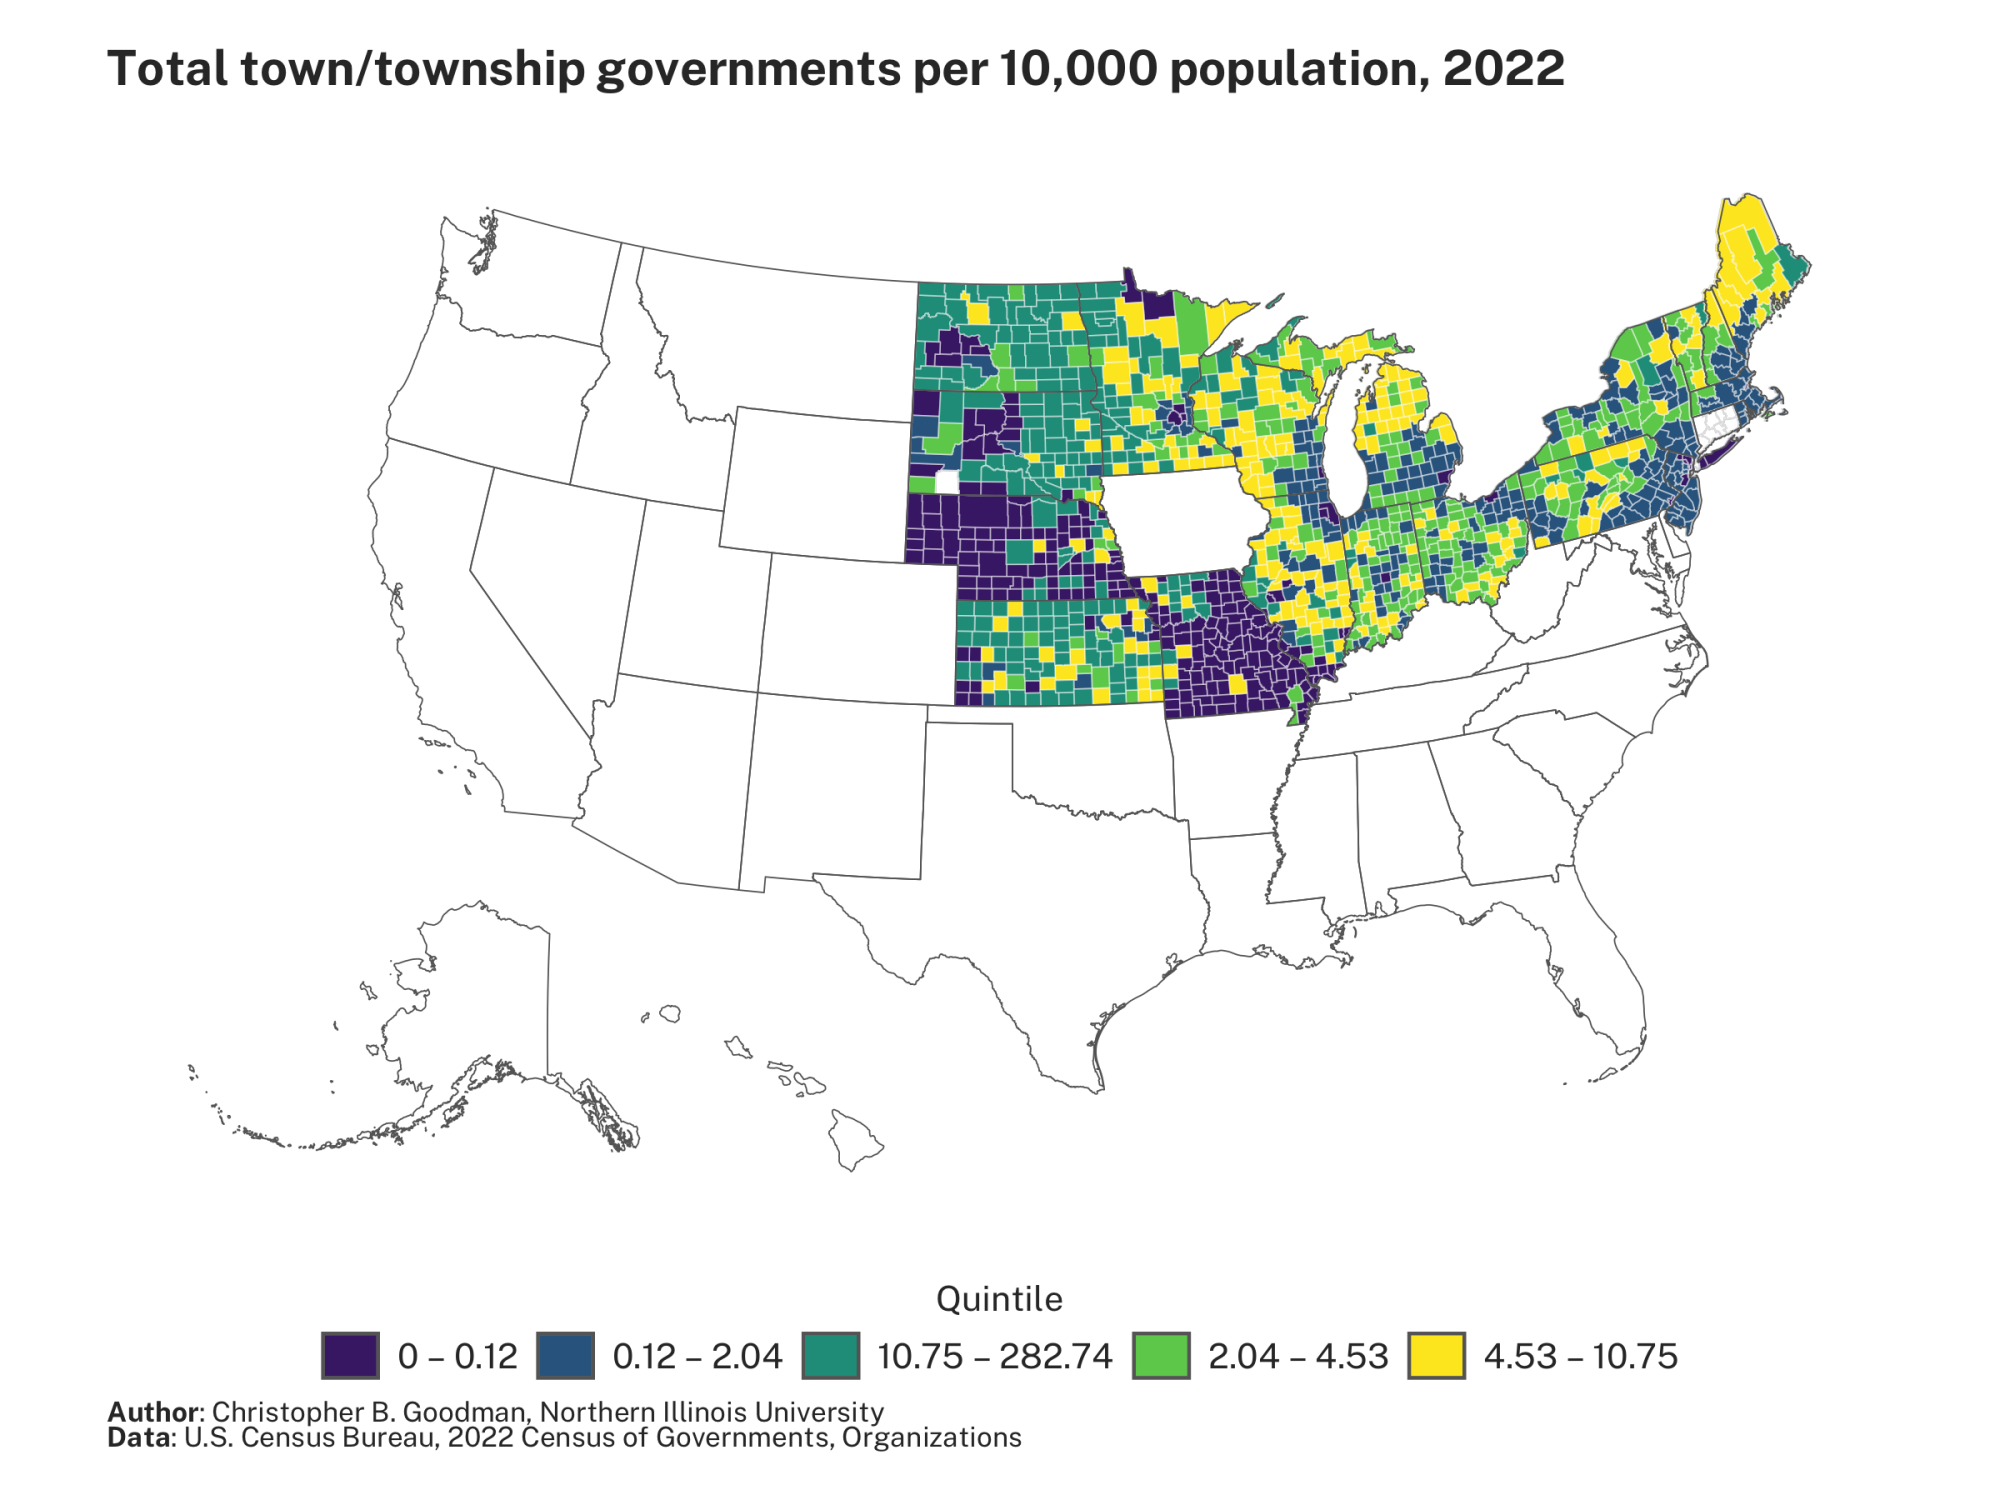 Total town/township governments per 10,000 population, 2022